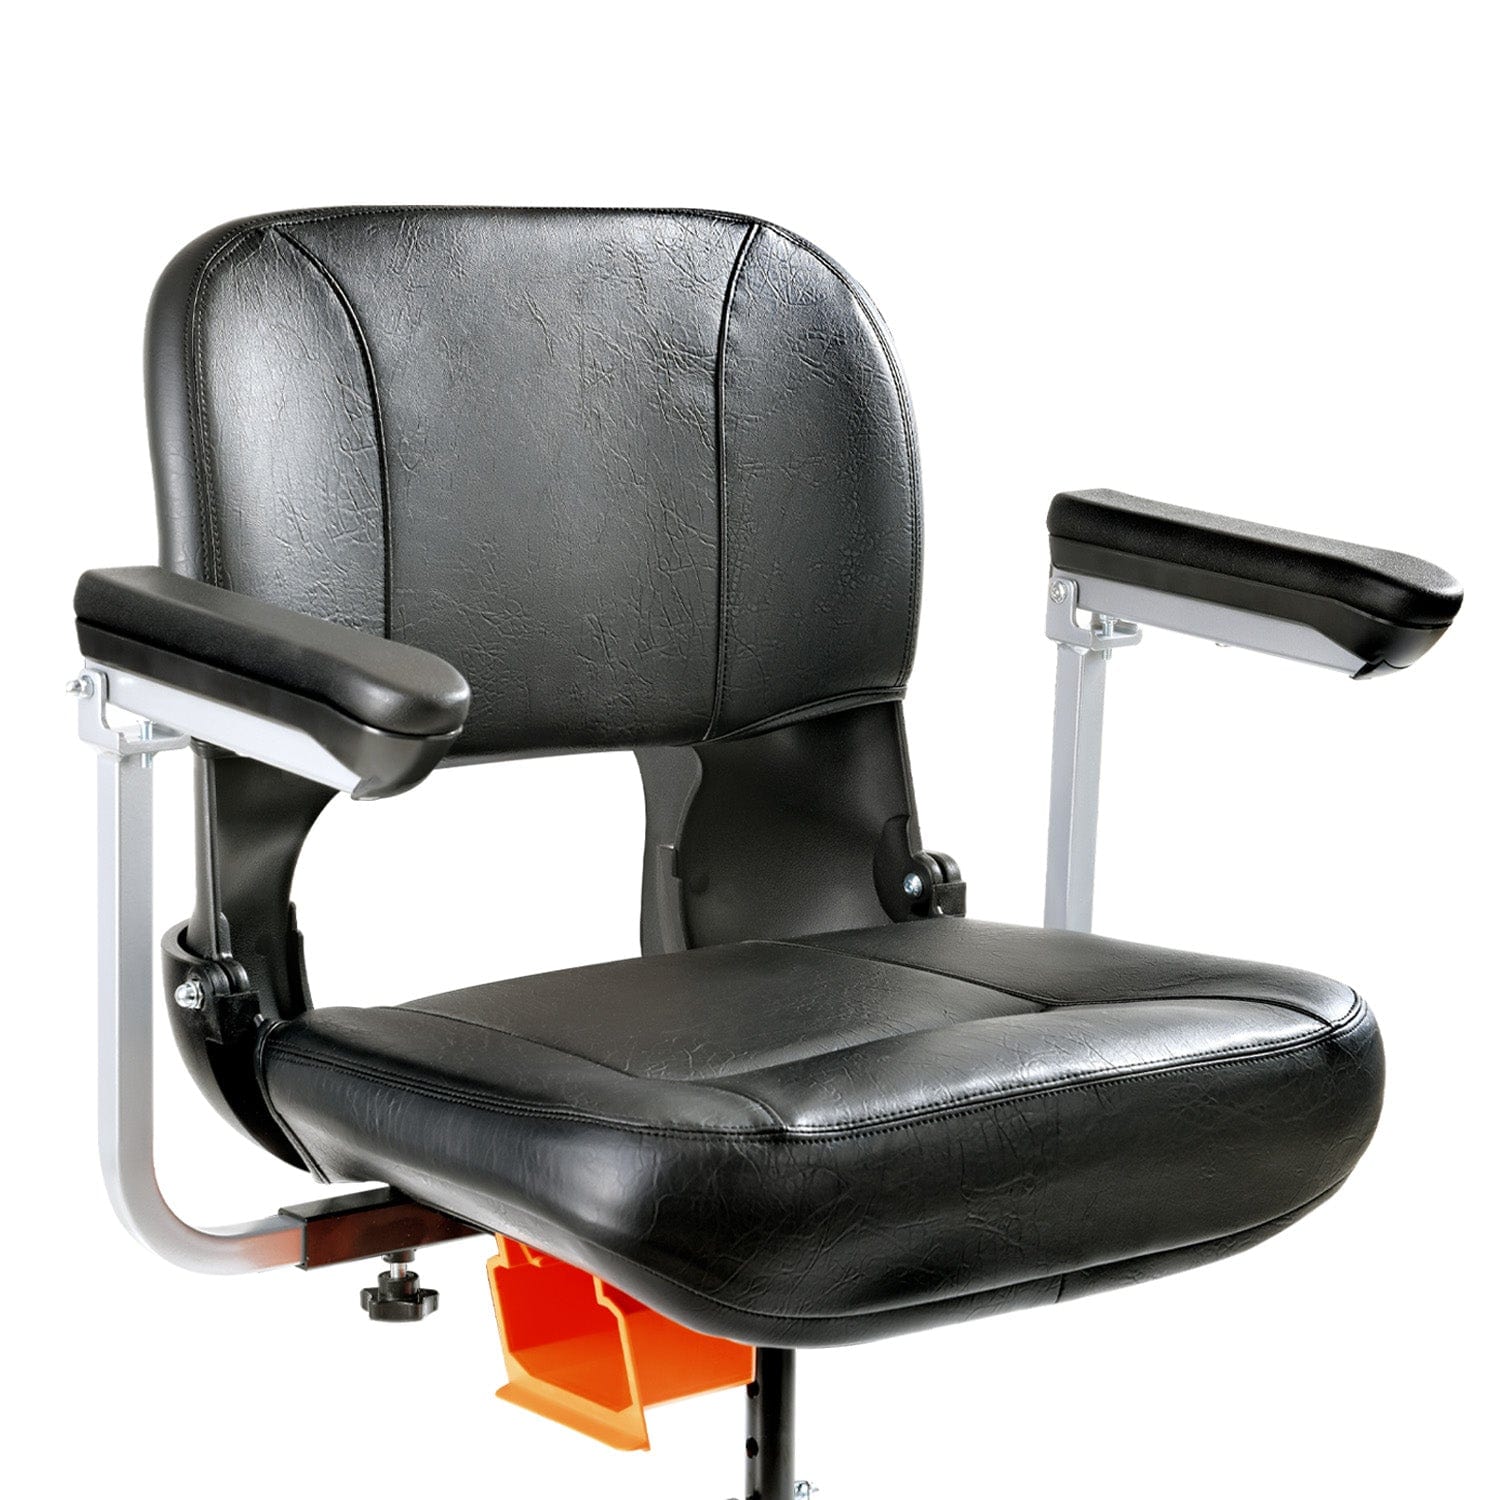 SuperHandy Mobility Scooter Seat Upgrade - For GUT112